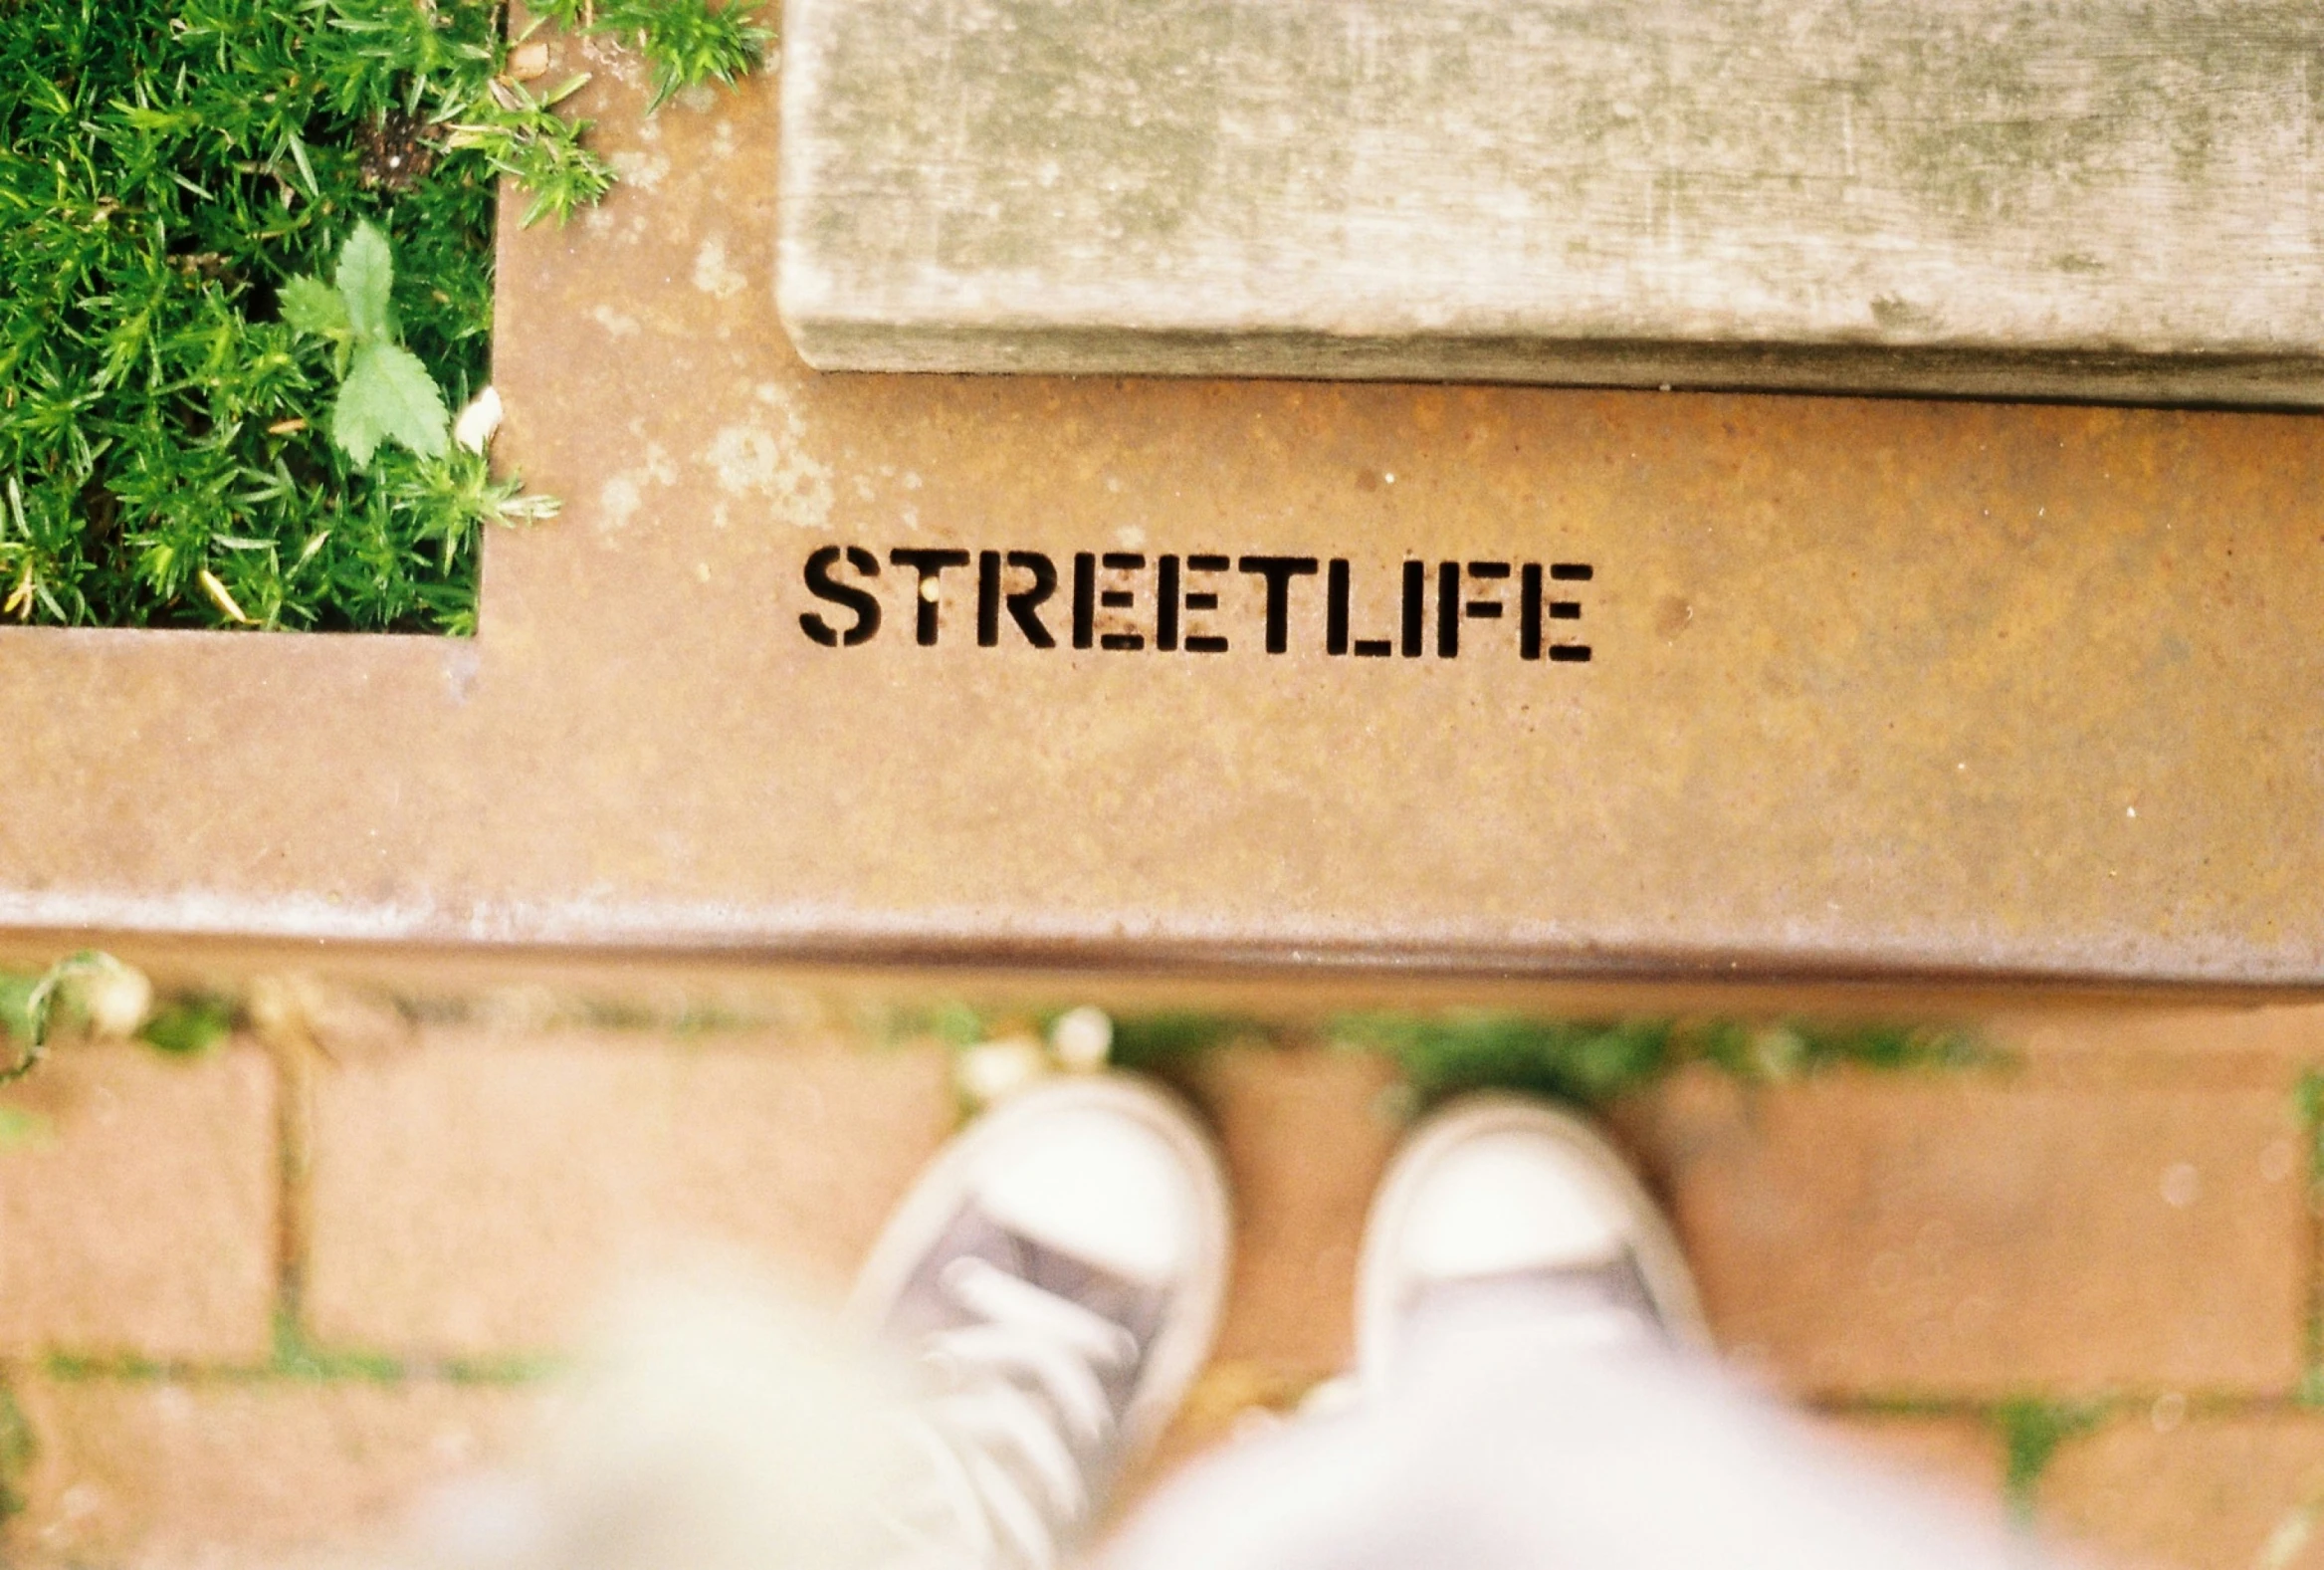 a foot is standing next to a street sign with wording